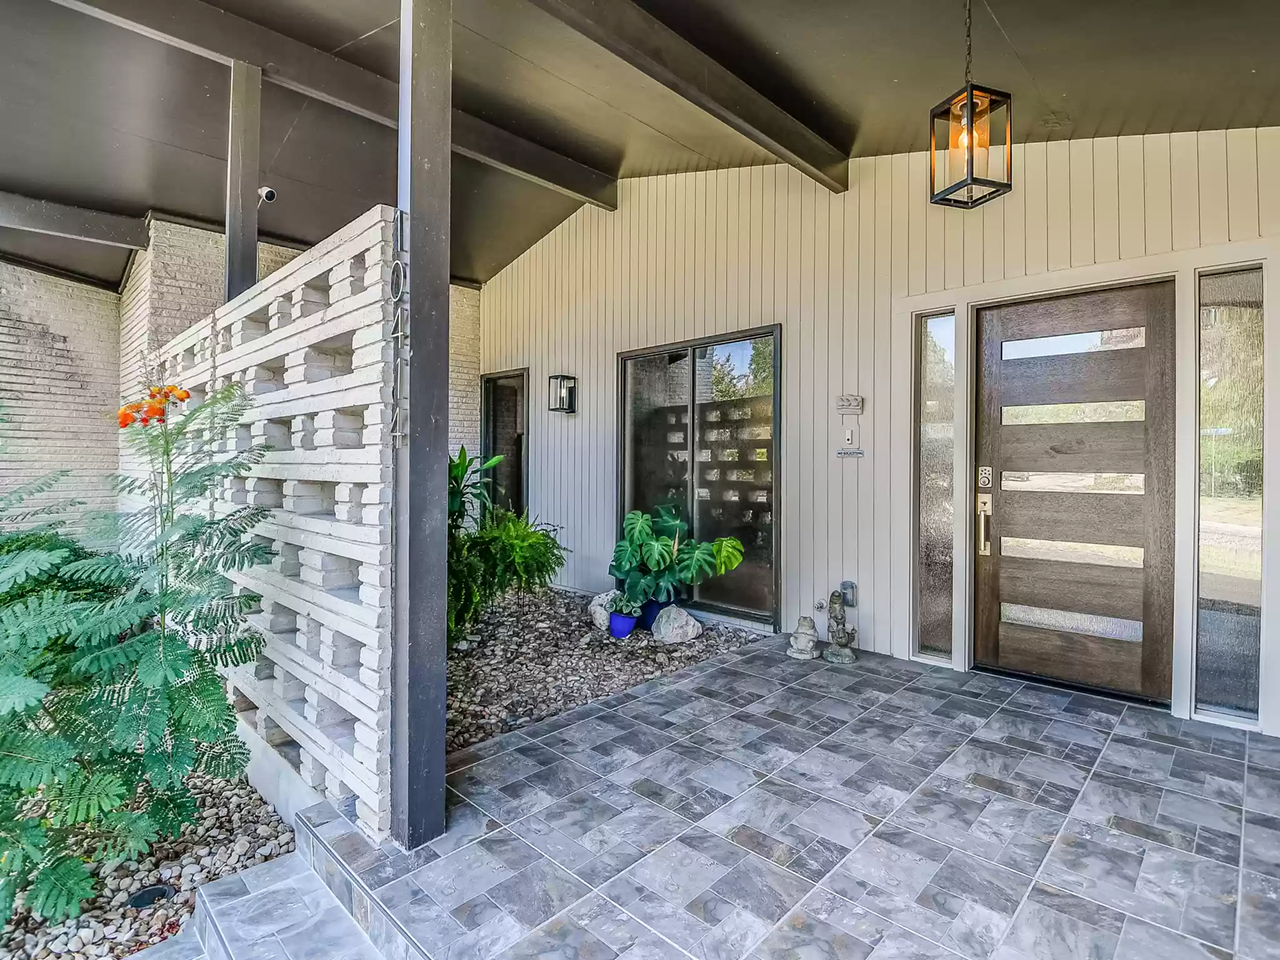 This fully restored Mid-Century Modern home in San Antonio is now on the market